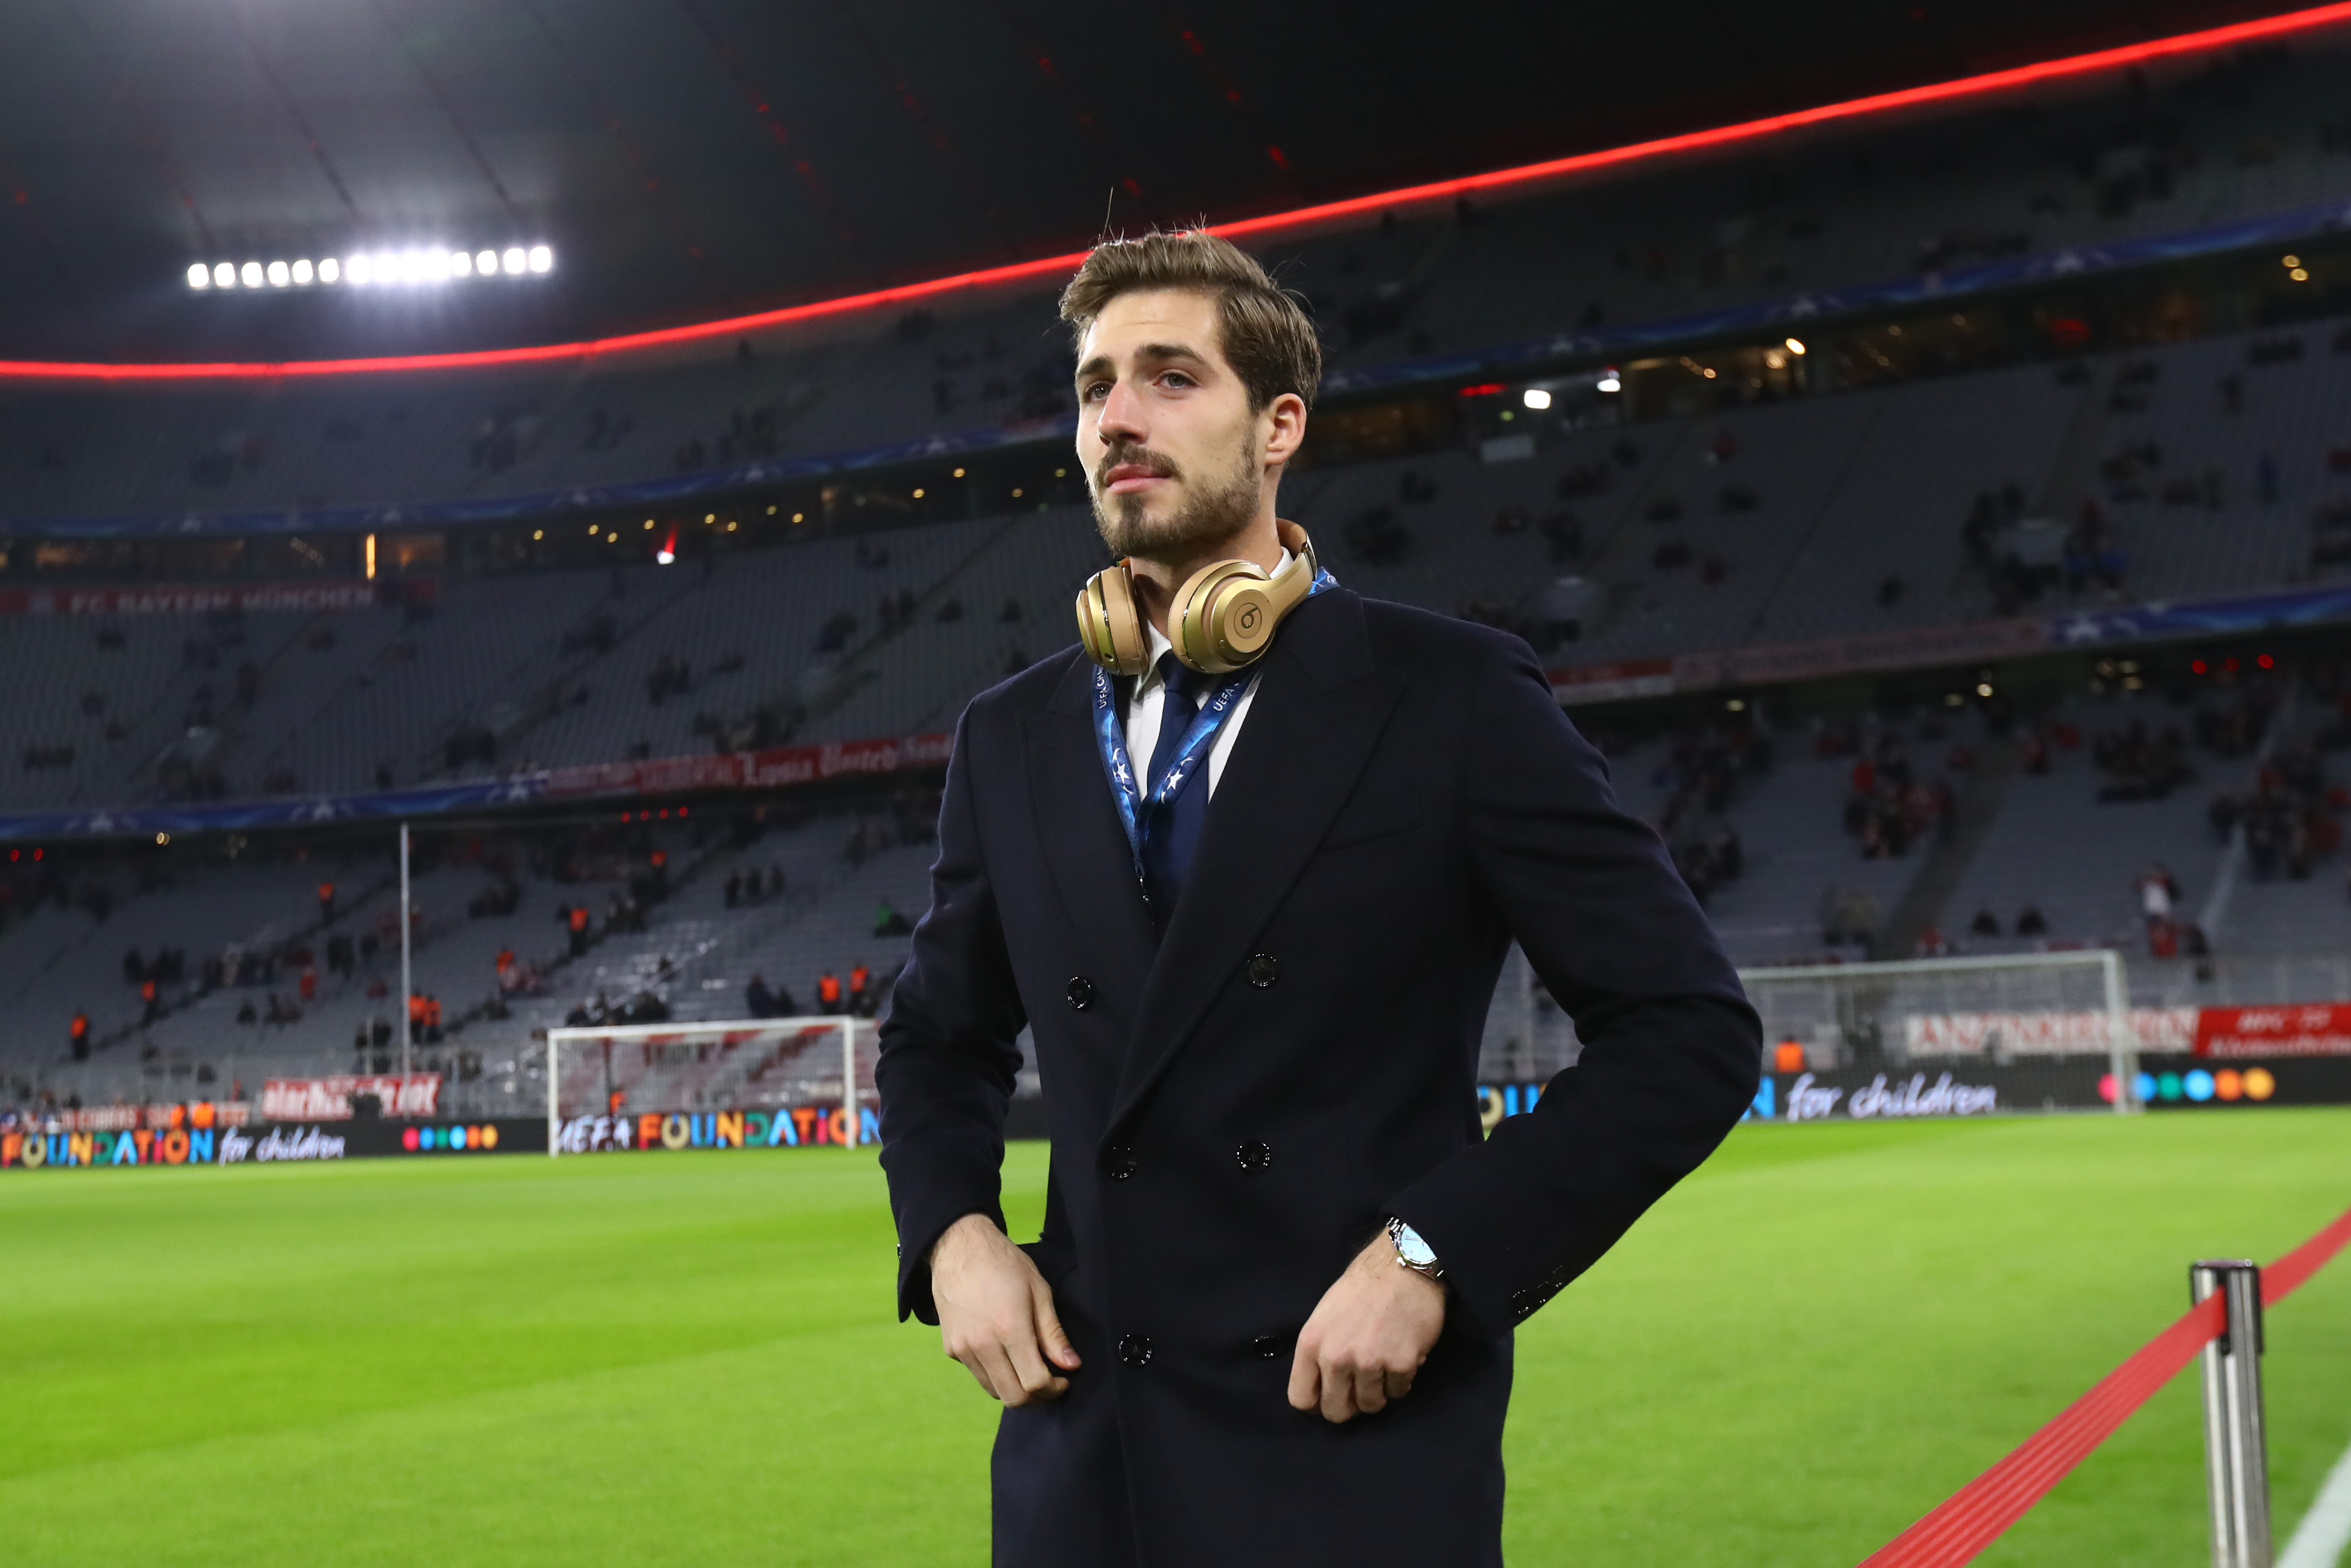 MUNICH, GERMANY - DECEMBER 05:  Kevin Trapp of PSG looks on prior to the UEFA Champions League group B match between Bayern Muenchen and Paris Saint-Germain at Allianz Arena on December 5, 2017 in Munich, Germany.  (Photo by Alexander Hassenstein/Bongarts/Getty Images)